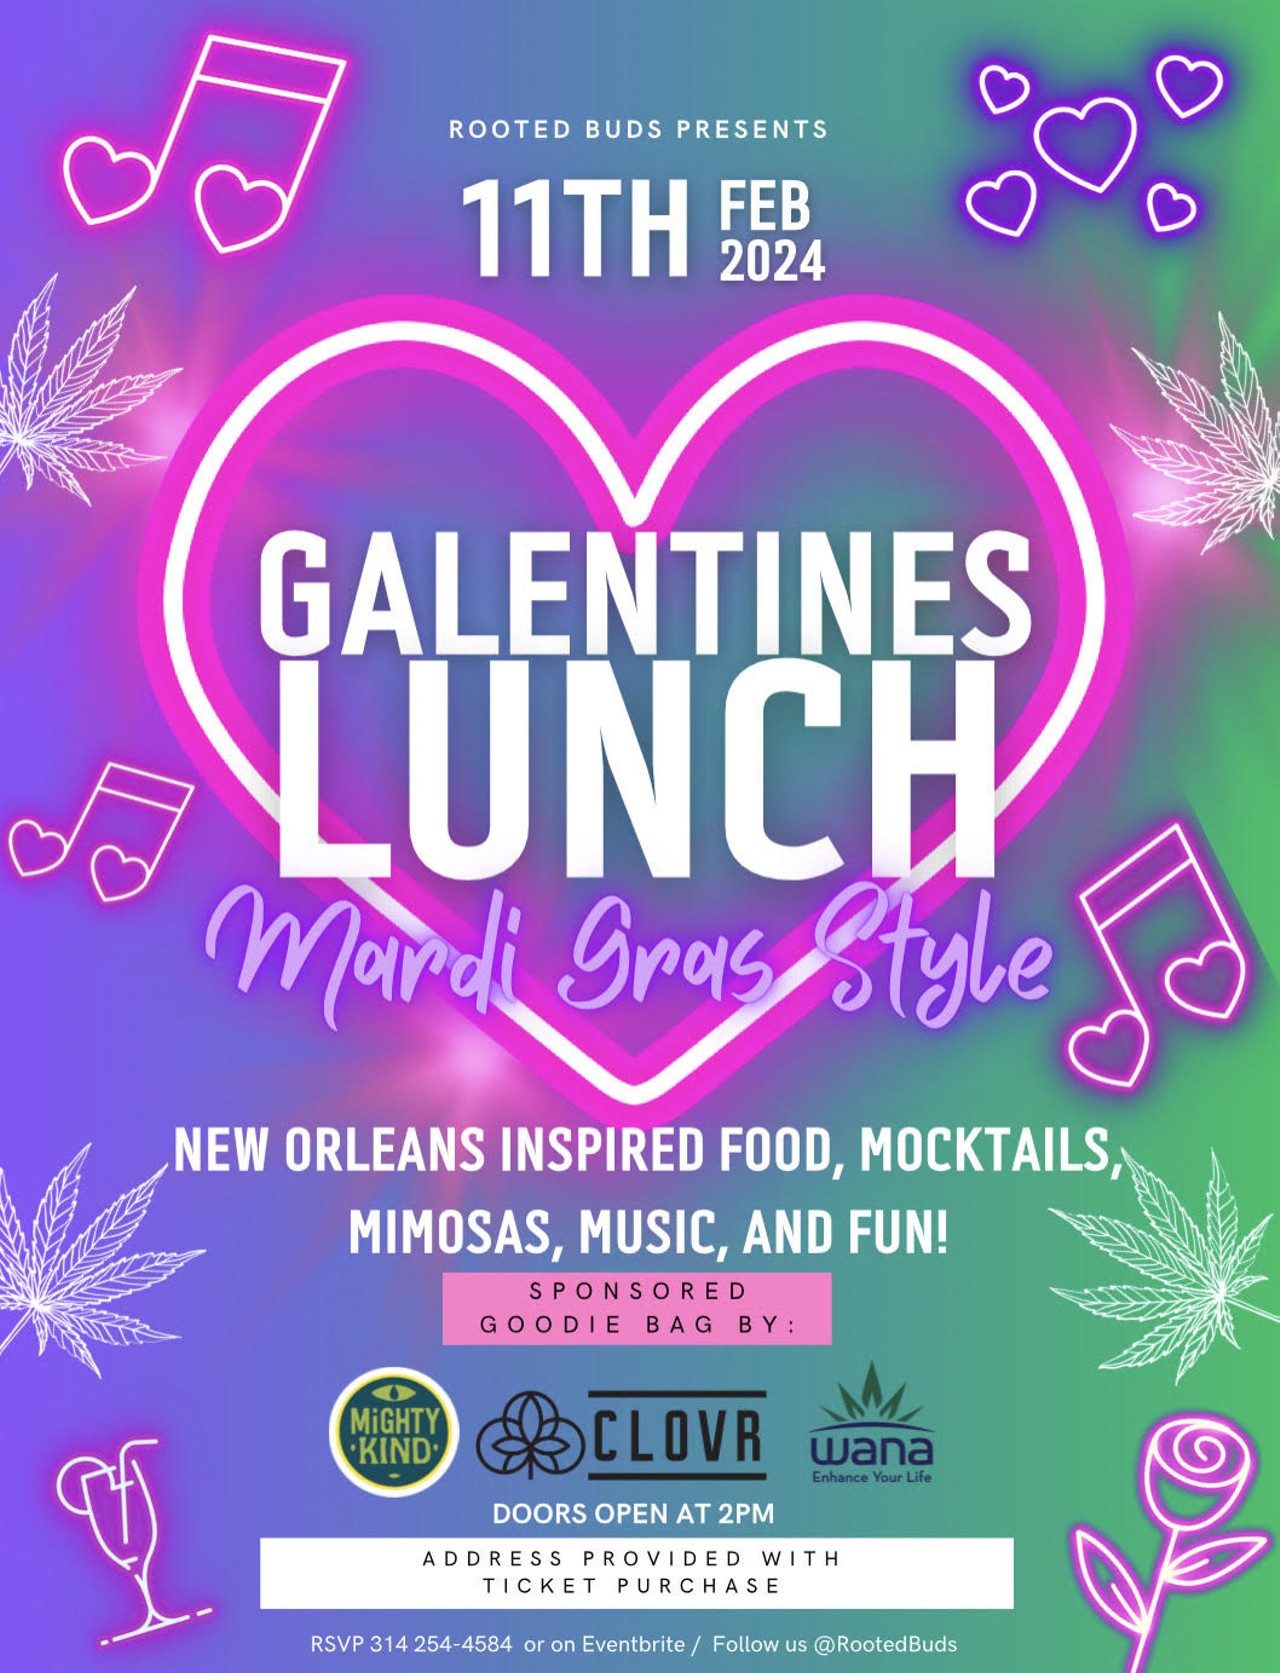 Galentine&rsquo;s Lunch: Mardi Gras Inspired
Rooted Buds and Snoop Hollins have joined together to create the ultimate Galentine&rsquo;s-Mardi Gras lunch at a secret location (lunch provided with purchase of an $85 ticket). From 2 to 5 p.m., you and your besties can enjoy an afternoon filled with New Orleans-inspired food, colorful mocktails, bottomless mimosas, several photo opportunities, music and karaoke. To top it off, you can create your own heart-shaped stash box. Make sure to wear your best purple, green and gold attire and get ready to have a ball &mdash; no pink and red for this party. Tickets can be purchased on Eventbrite&rsquo;s website.